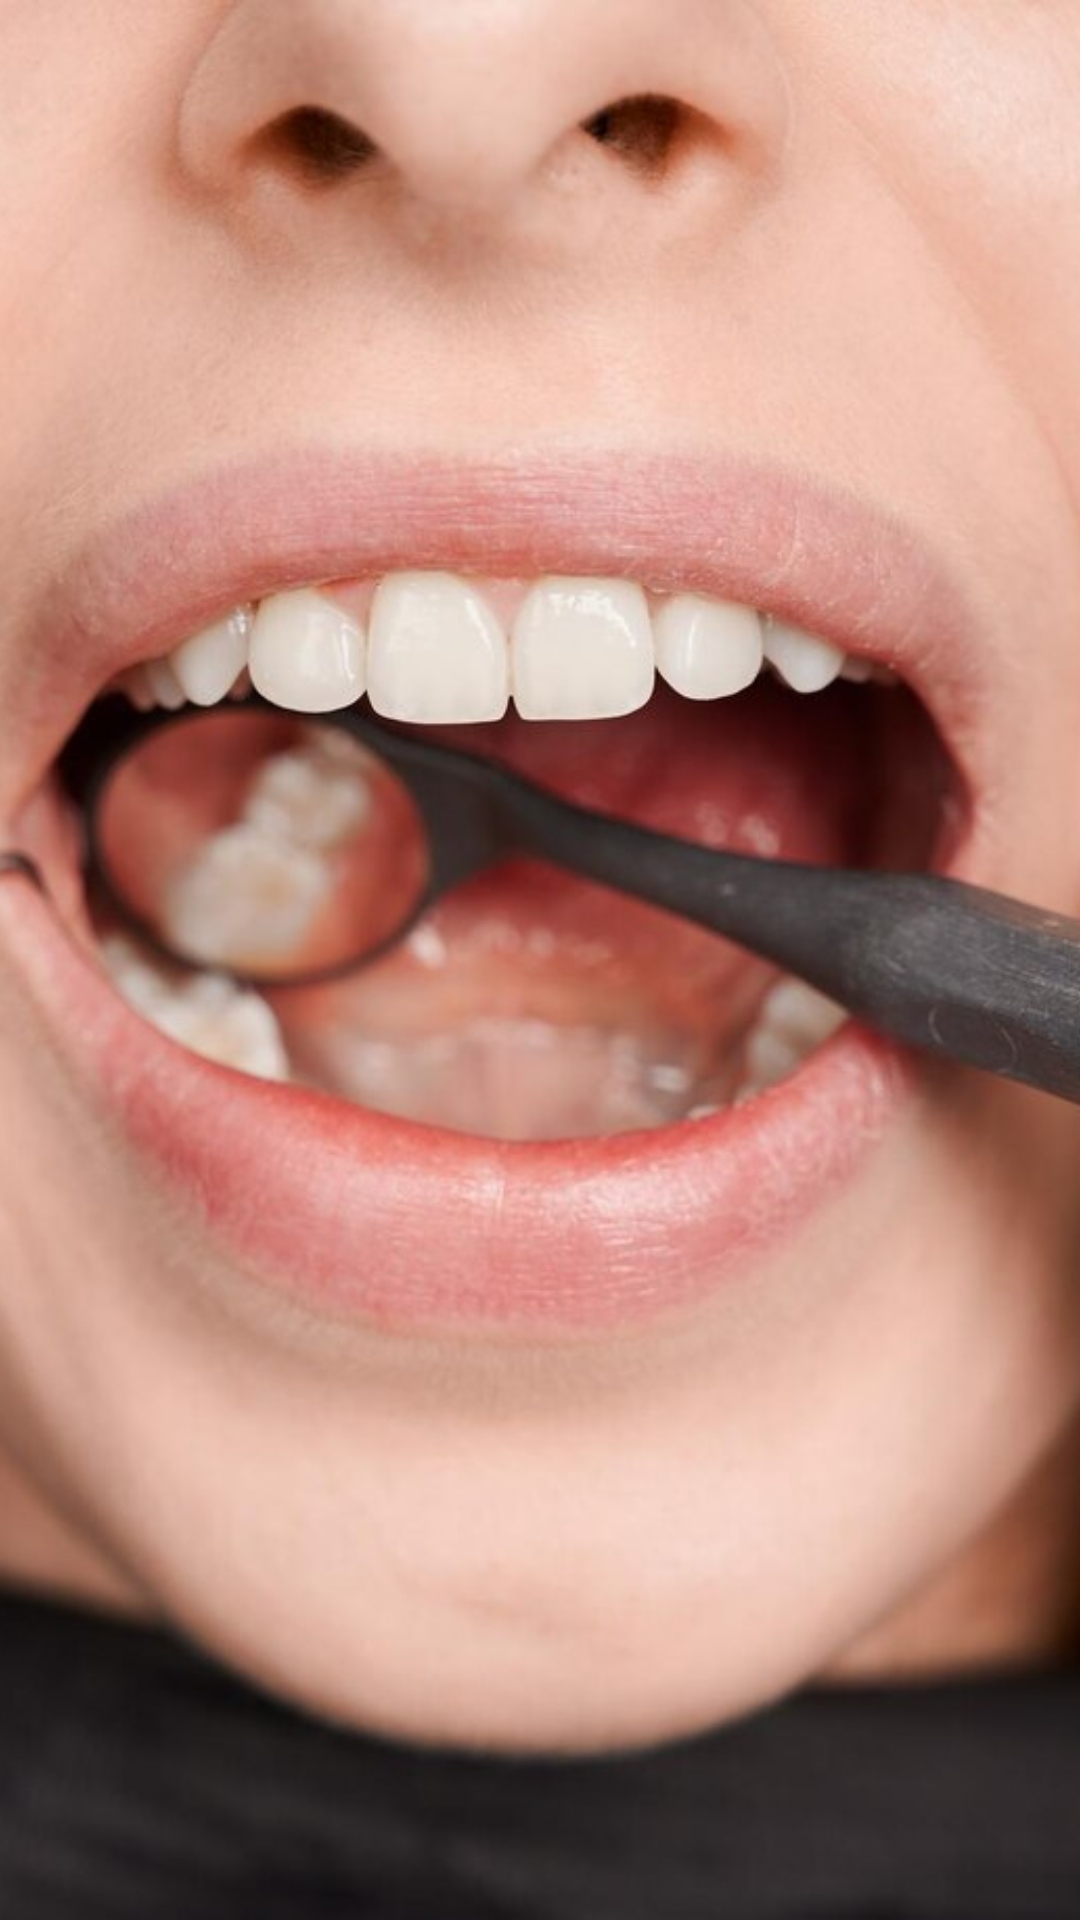 5 home remedies to treat oral injuries